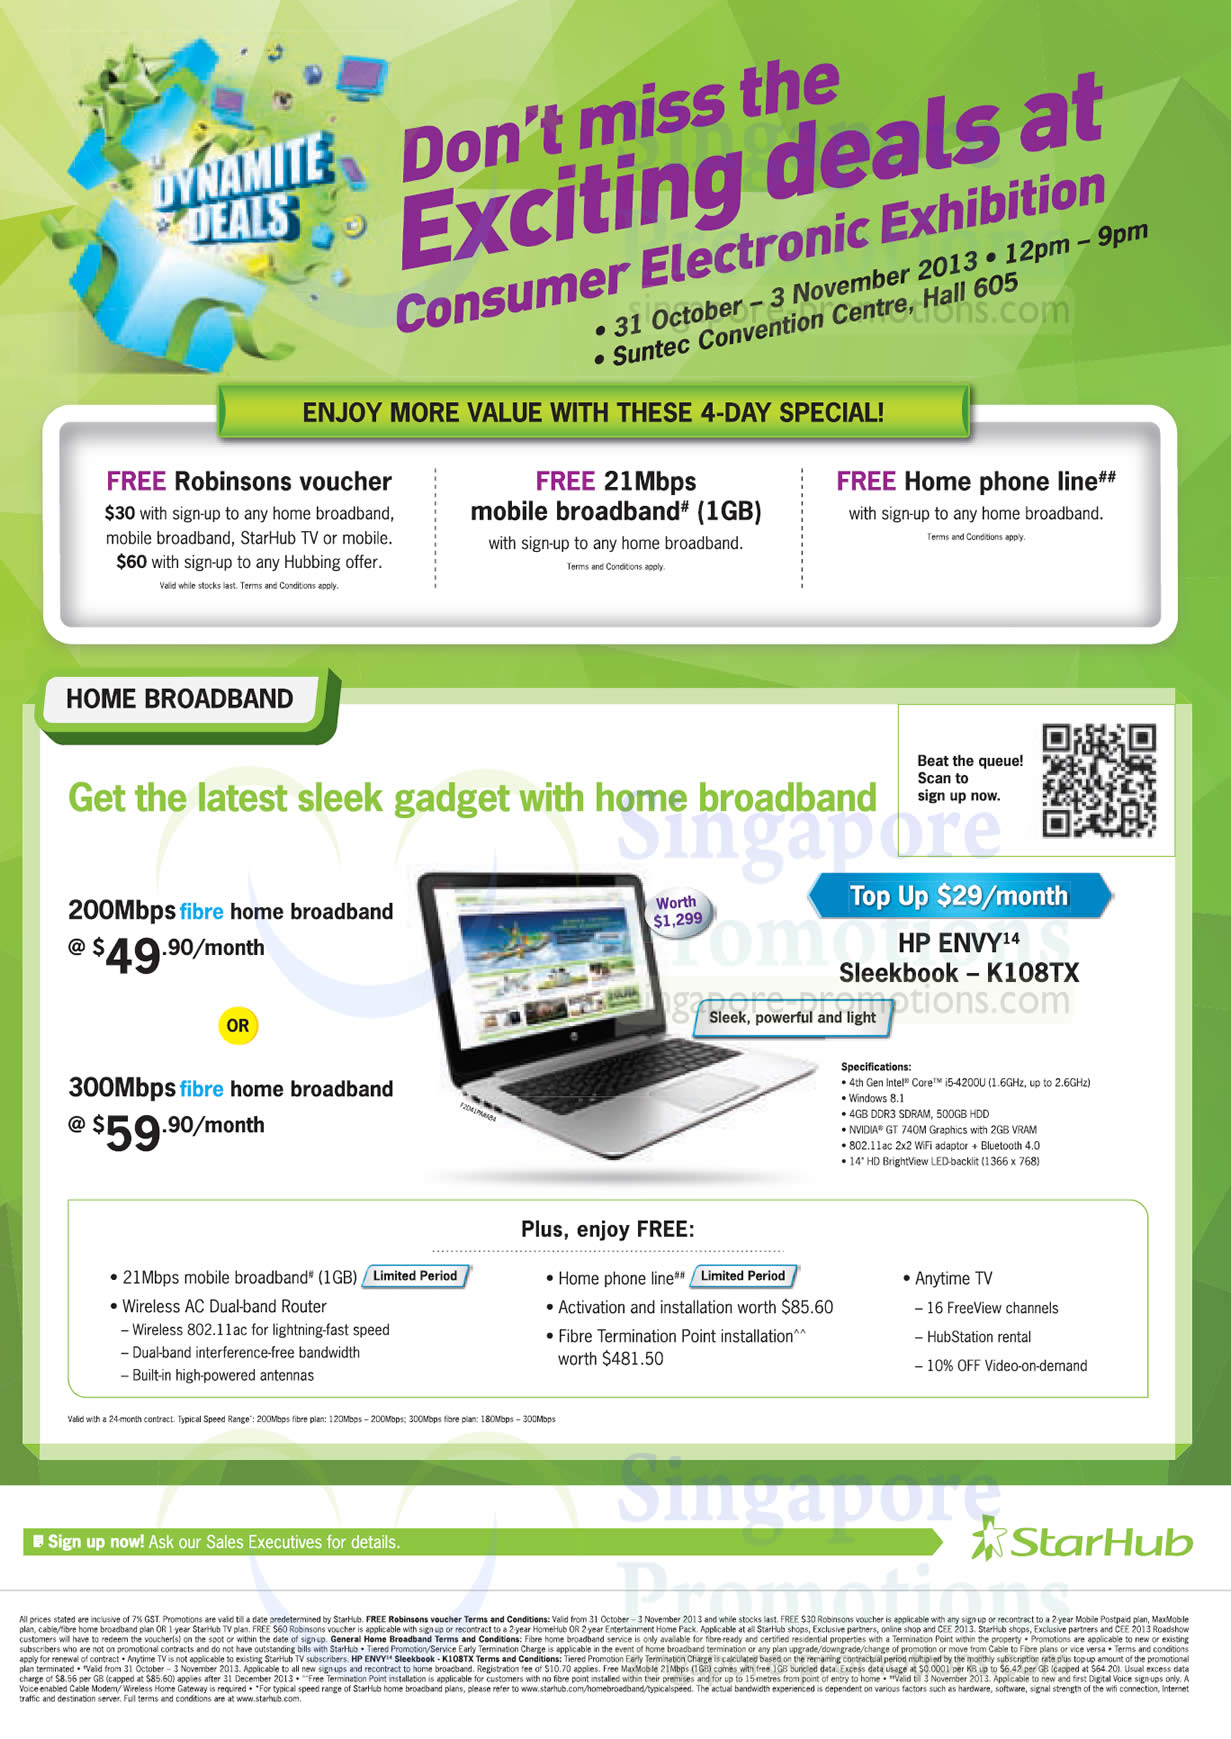 Featured image for Starhub CEE 2013 Smartphones, Tablets, Cable TV & Mobile/Home Broadband Offers 31 Oct - 3 Nov 2013